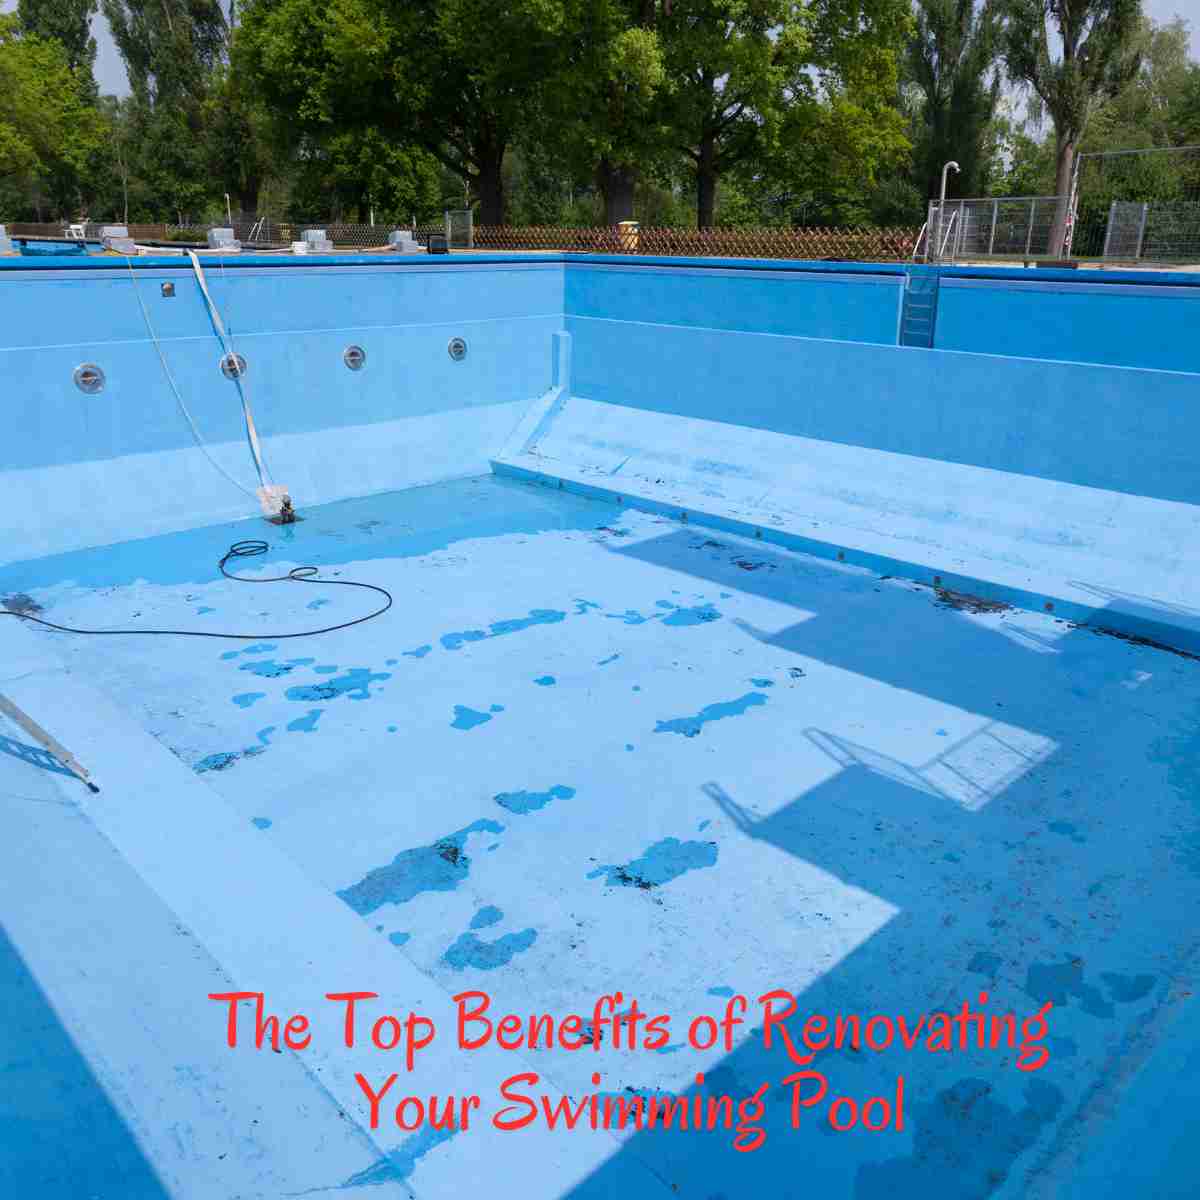 Benefits of Renovating Your Swimming Pool